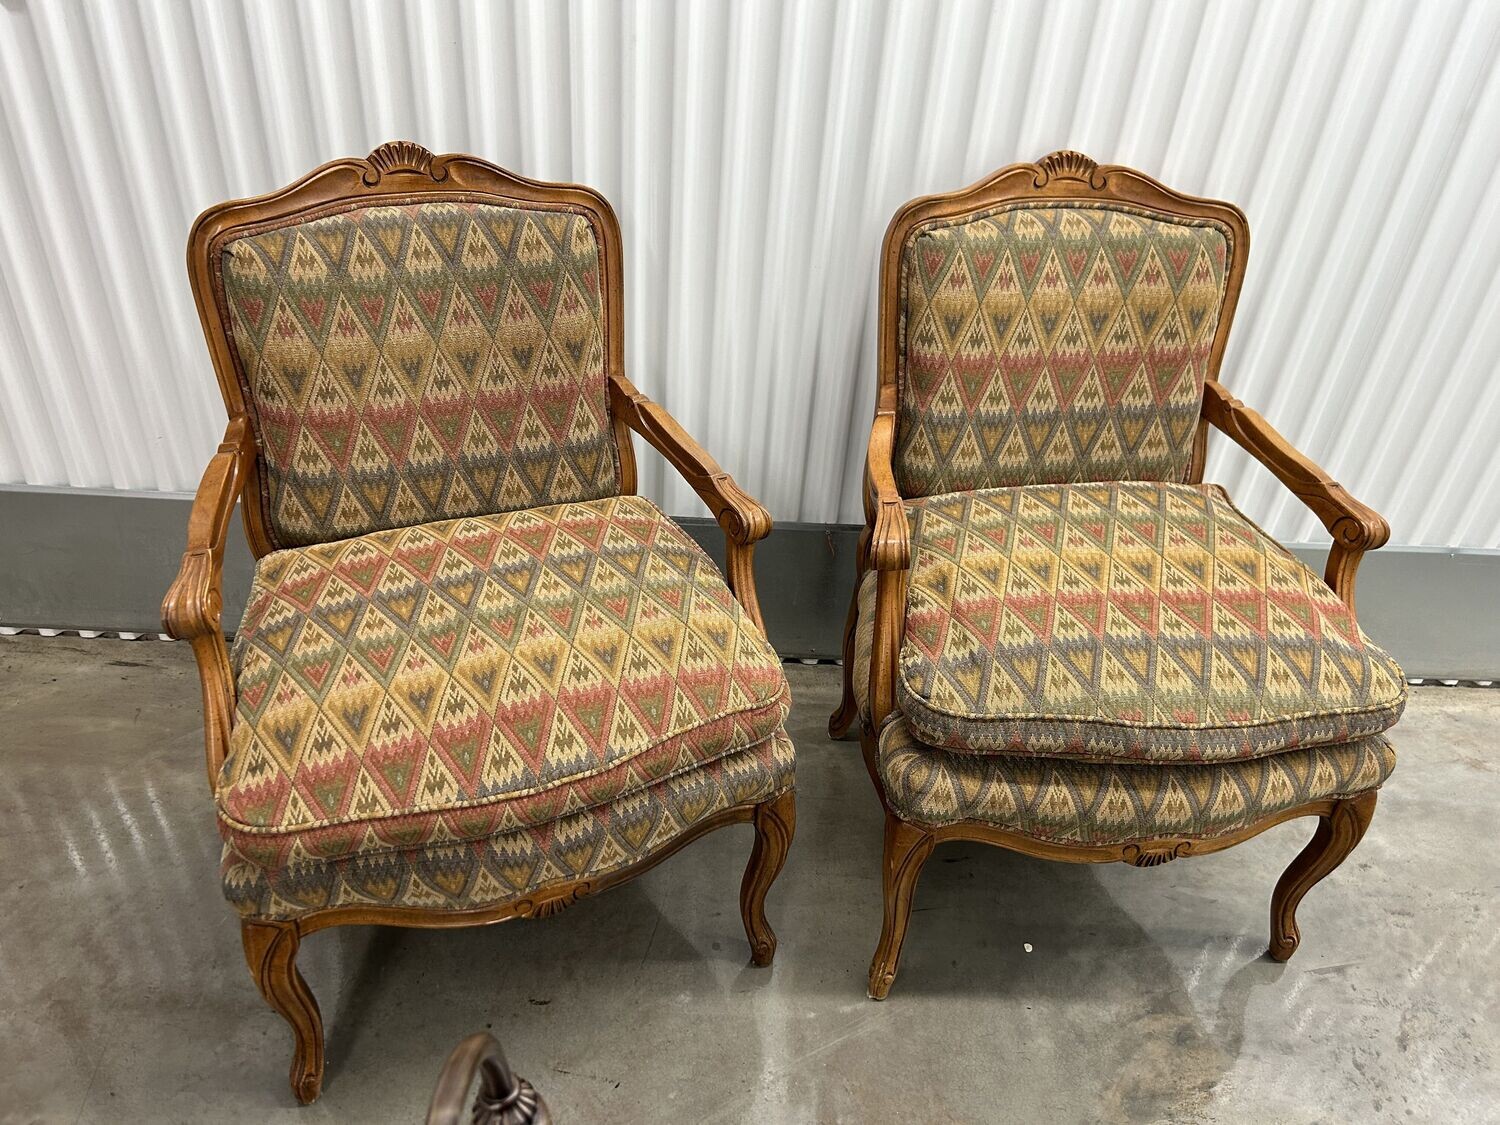 Matching Accent Chairs, antique style wood frame #2322 ** 1 day to sell, full price